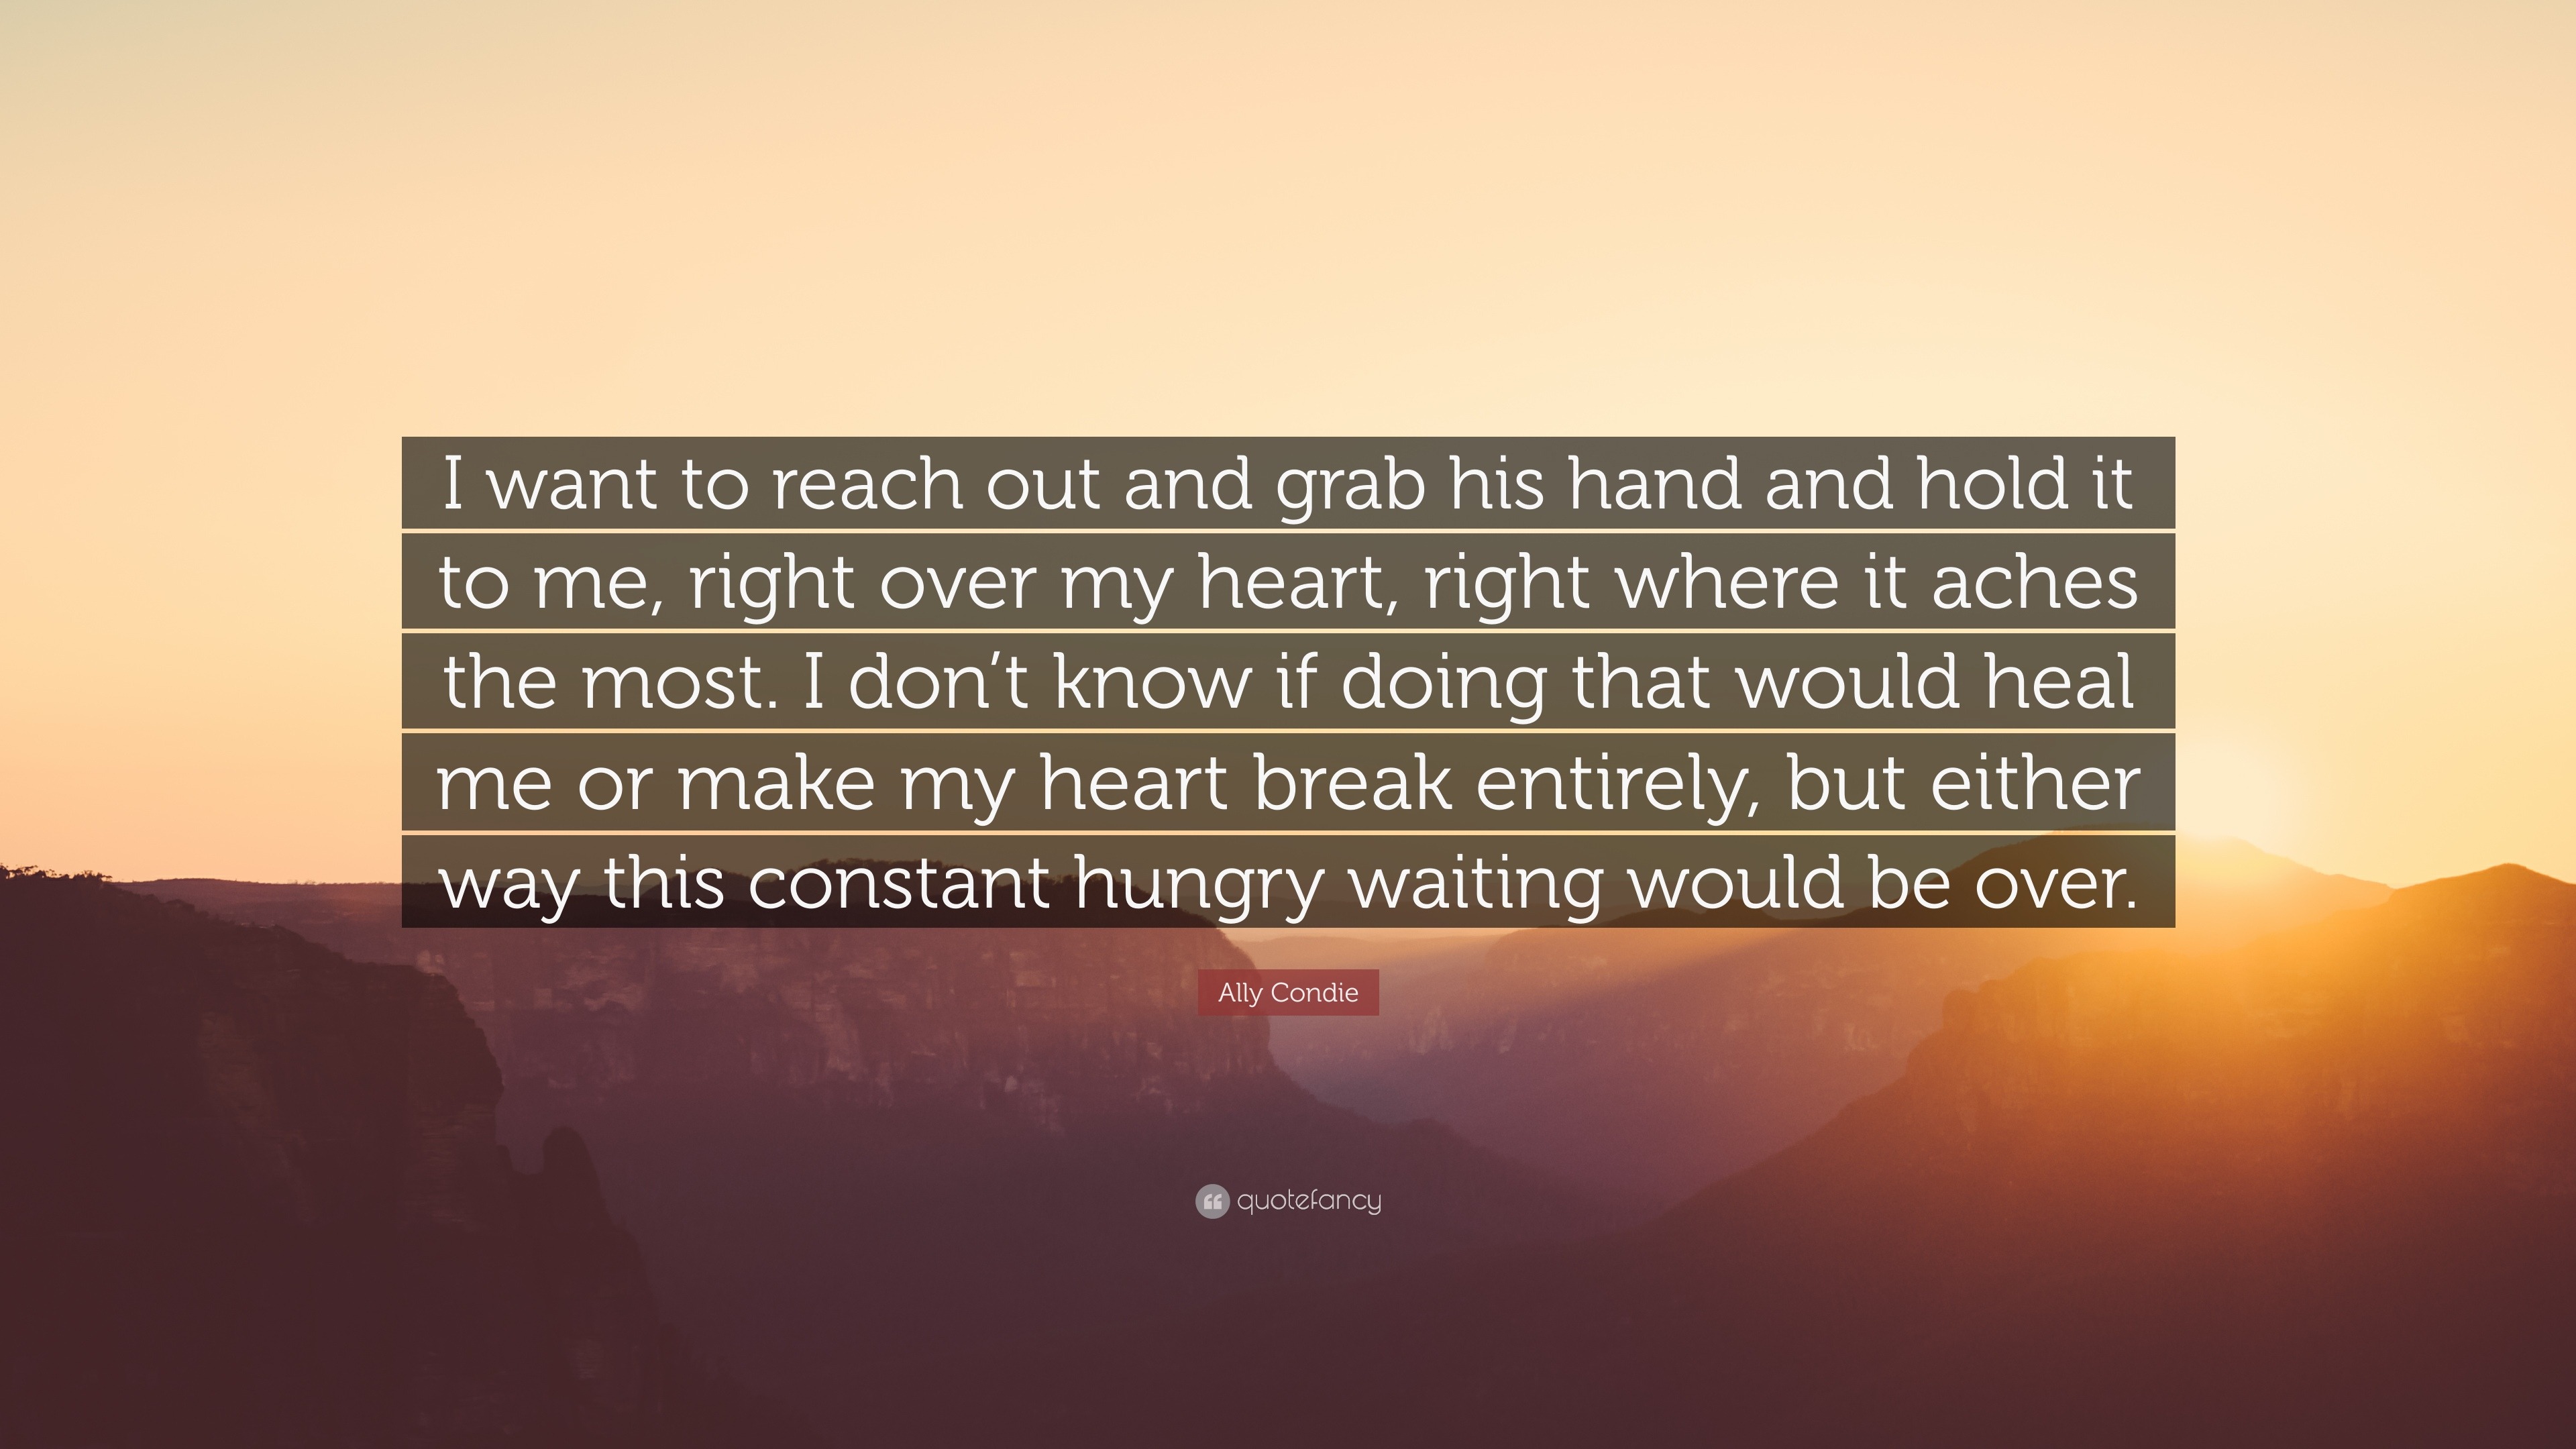 Ally Condie Quote I Want To Reach Out And Grab His Hand And Hold It To Me Right Over My Heart Right Where It Aches The Most I Don T Kno